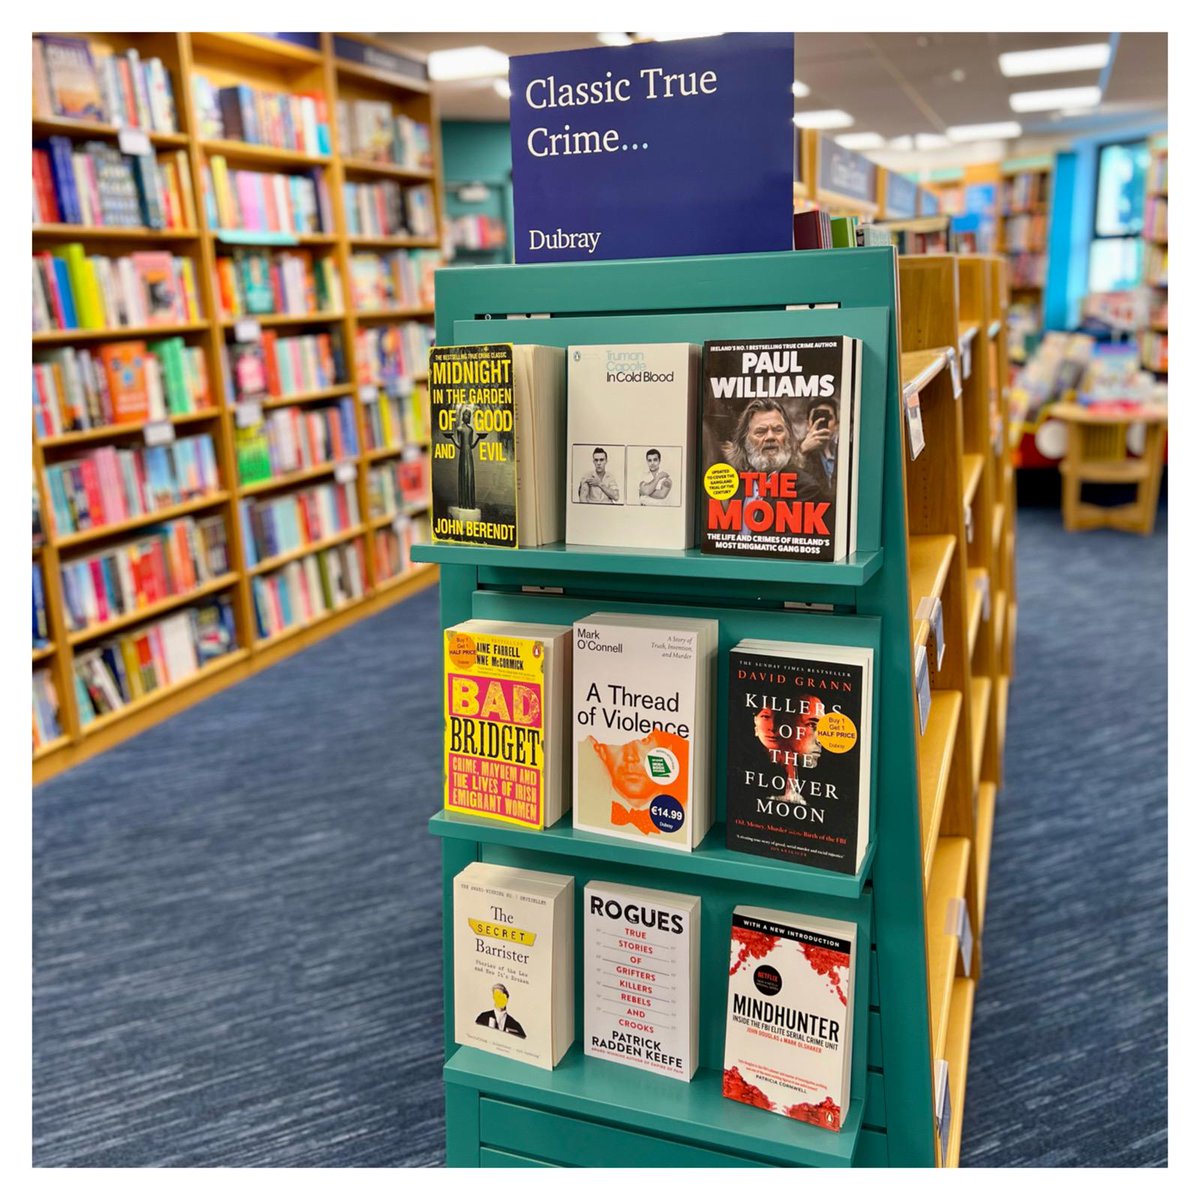 If you're into #truecrime, check out this remarkable selection of books! Explore #DubrayBlackrock's most popular true crime classics and chilling real-life crime stories. dubraybooks.ie